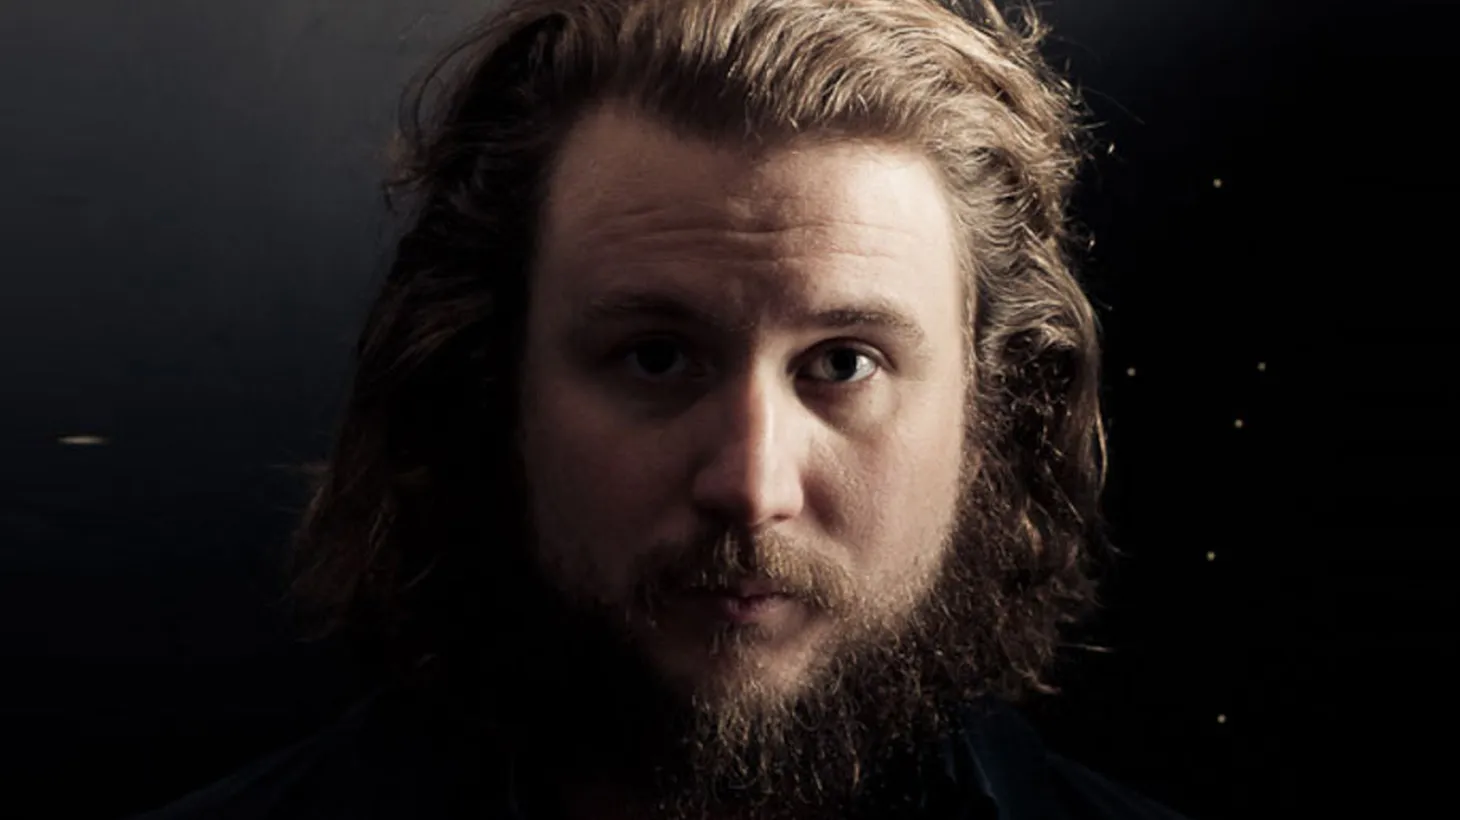 The city of Los Angeles played a big part in the creation of Jim James' second solo album Eternally Even.